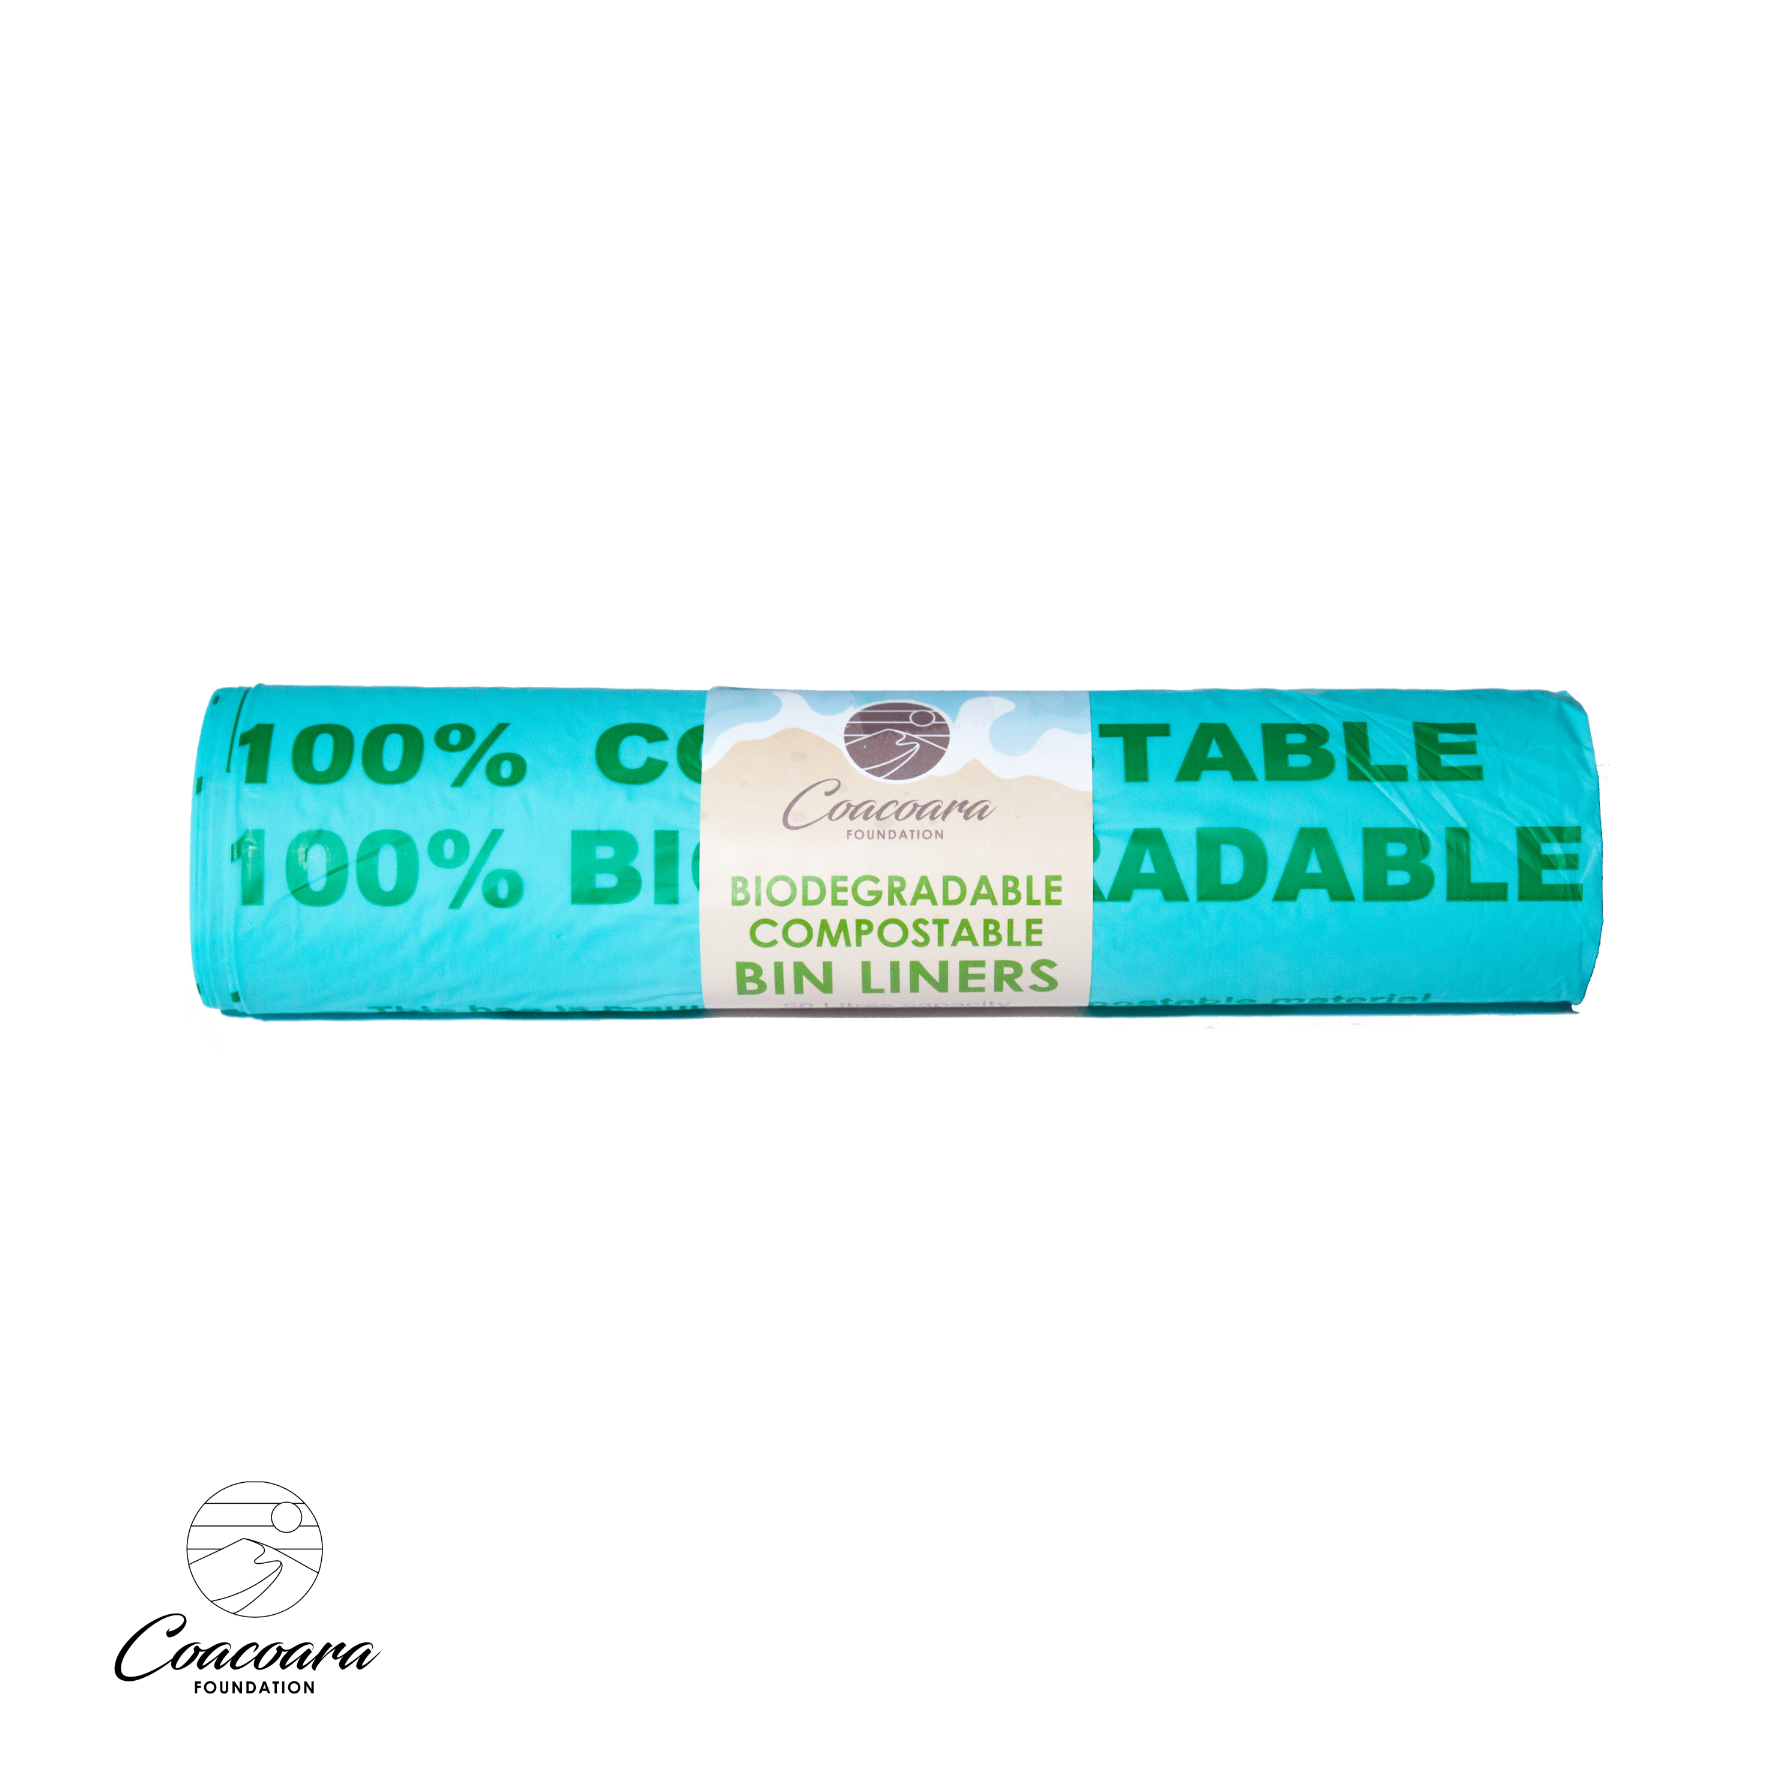 Bin Liners, corn starch, affordable, equilibrium, sustainable. compostable bin liners biodegradable compostable made in UK sustainable bin bags Coacoara